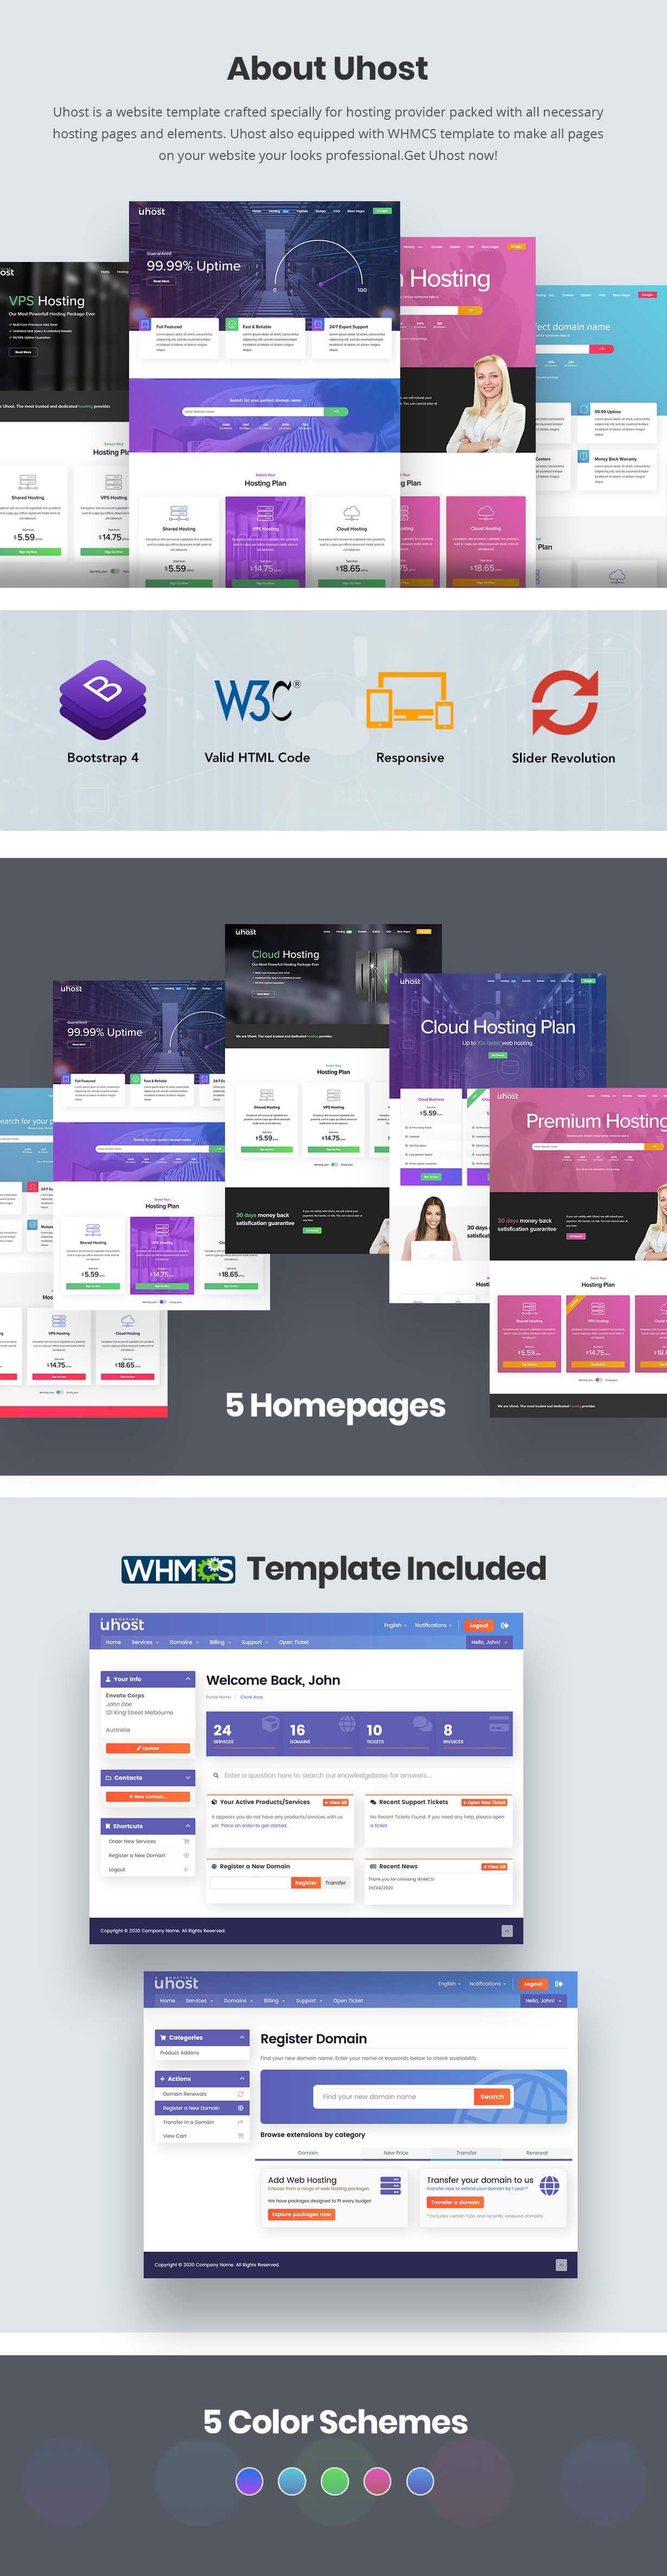 web hosting with whmcs template